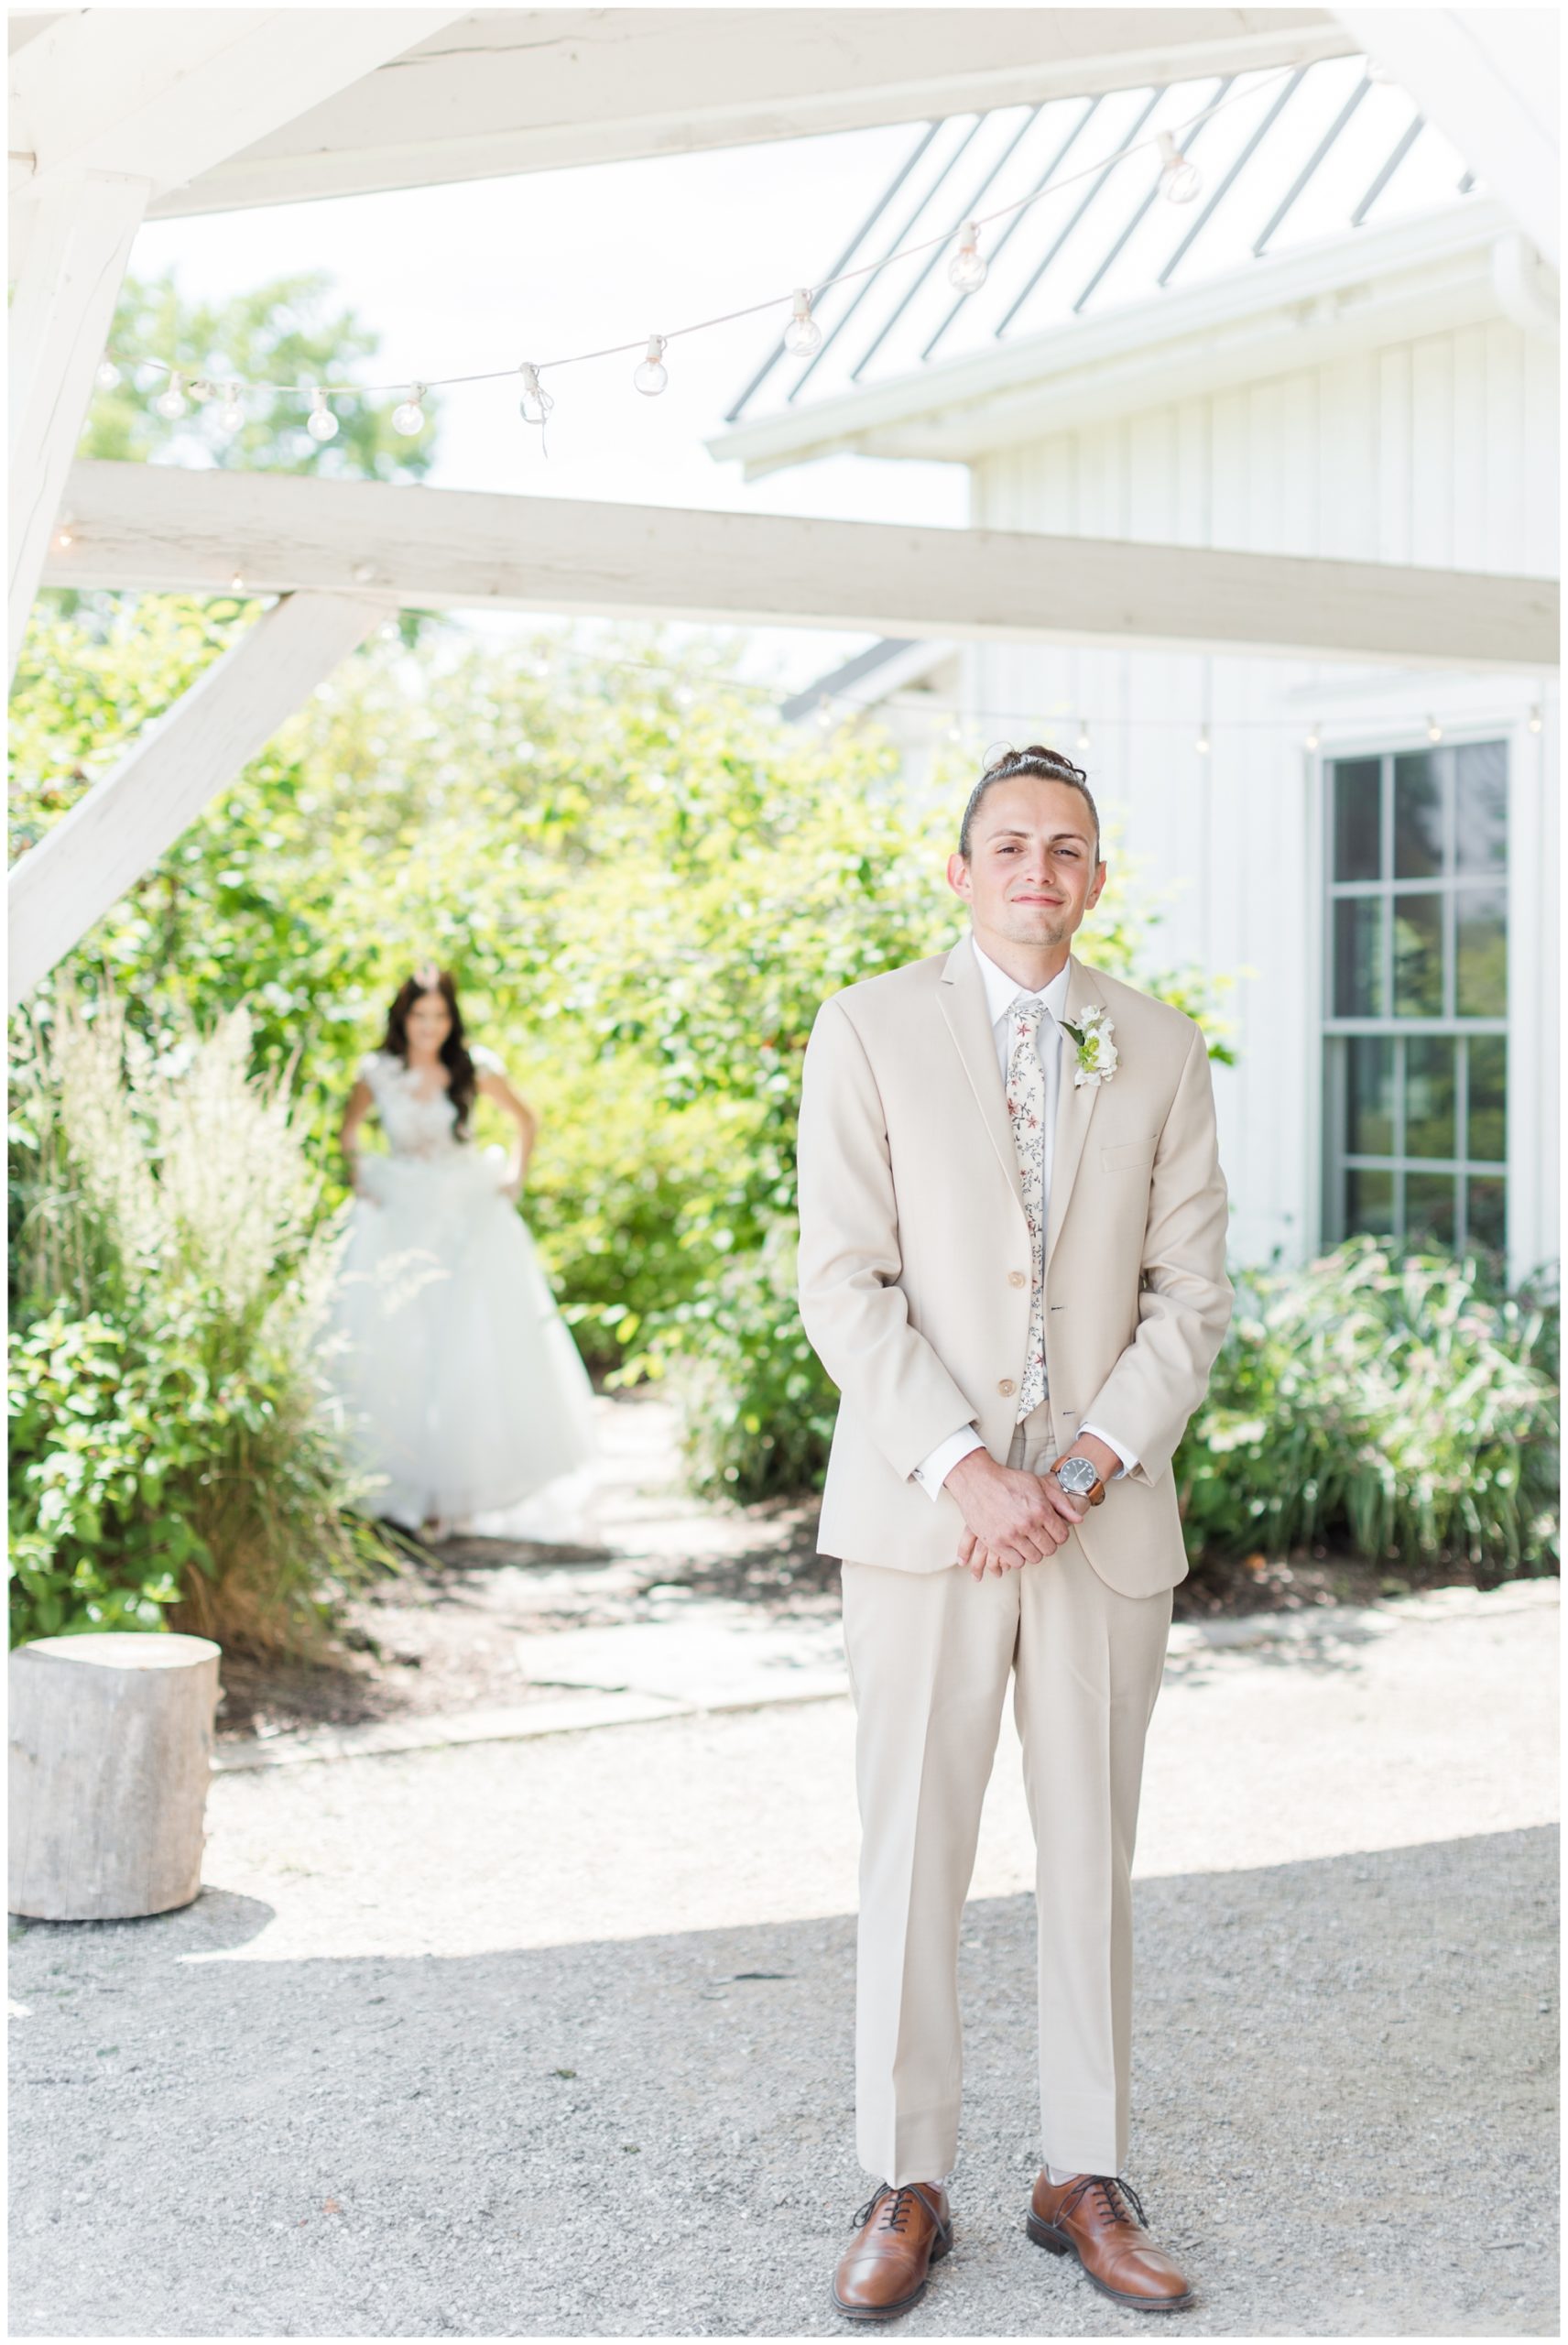 The groom poses in his khaki suit with white shirt and floral tie.  His bride is unfocused in the background as she walks up for the first look. 